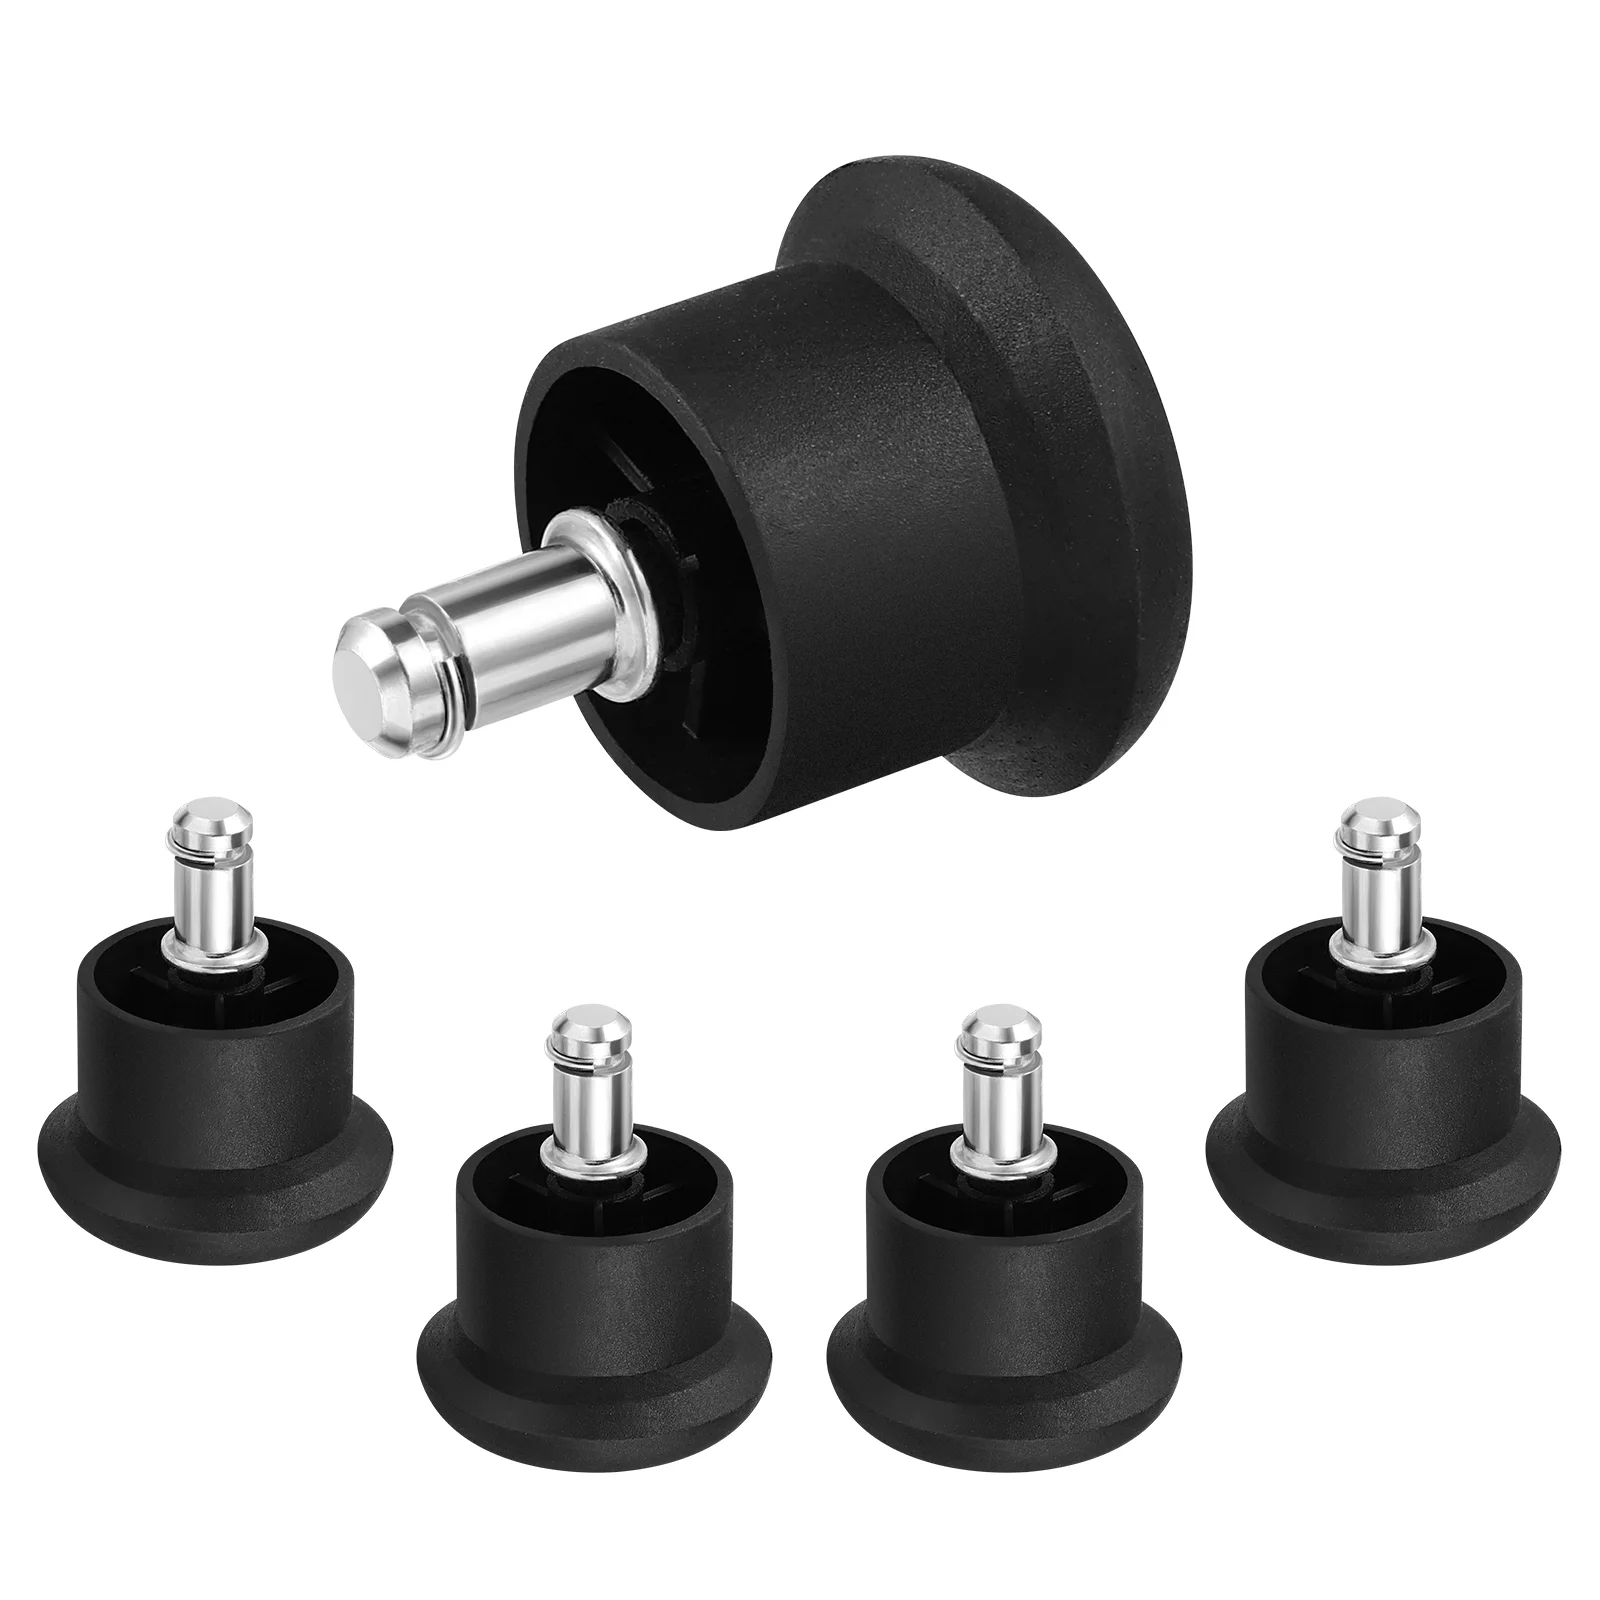 

VOSAREA 5pcs Chair Caster Wheels Heavy Duty & Safe Chair Wheels Stopper Fixed Stationary Castors Office Chair Foot Glides